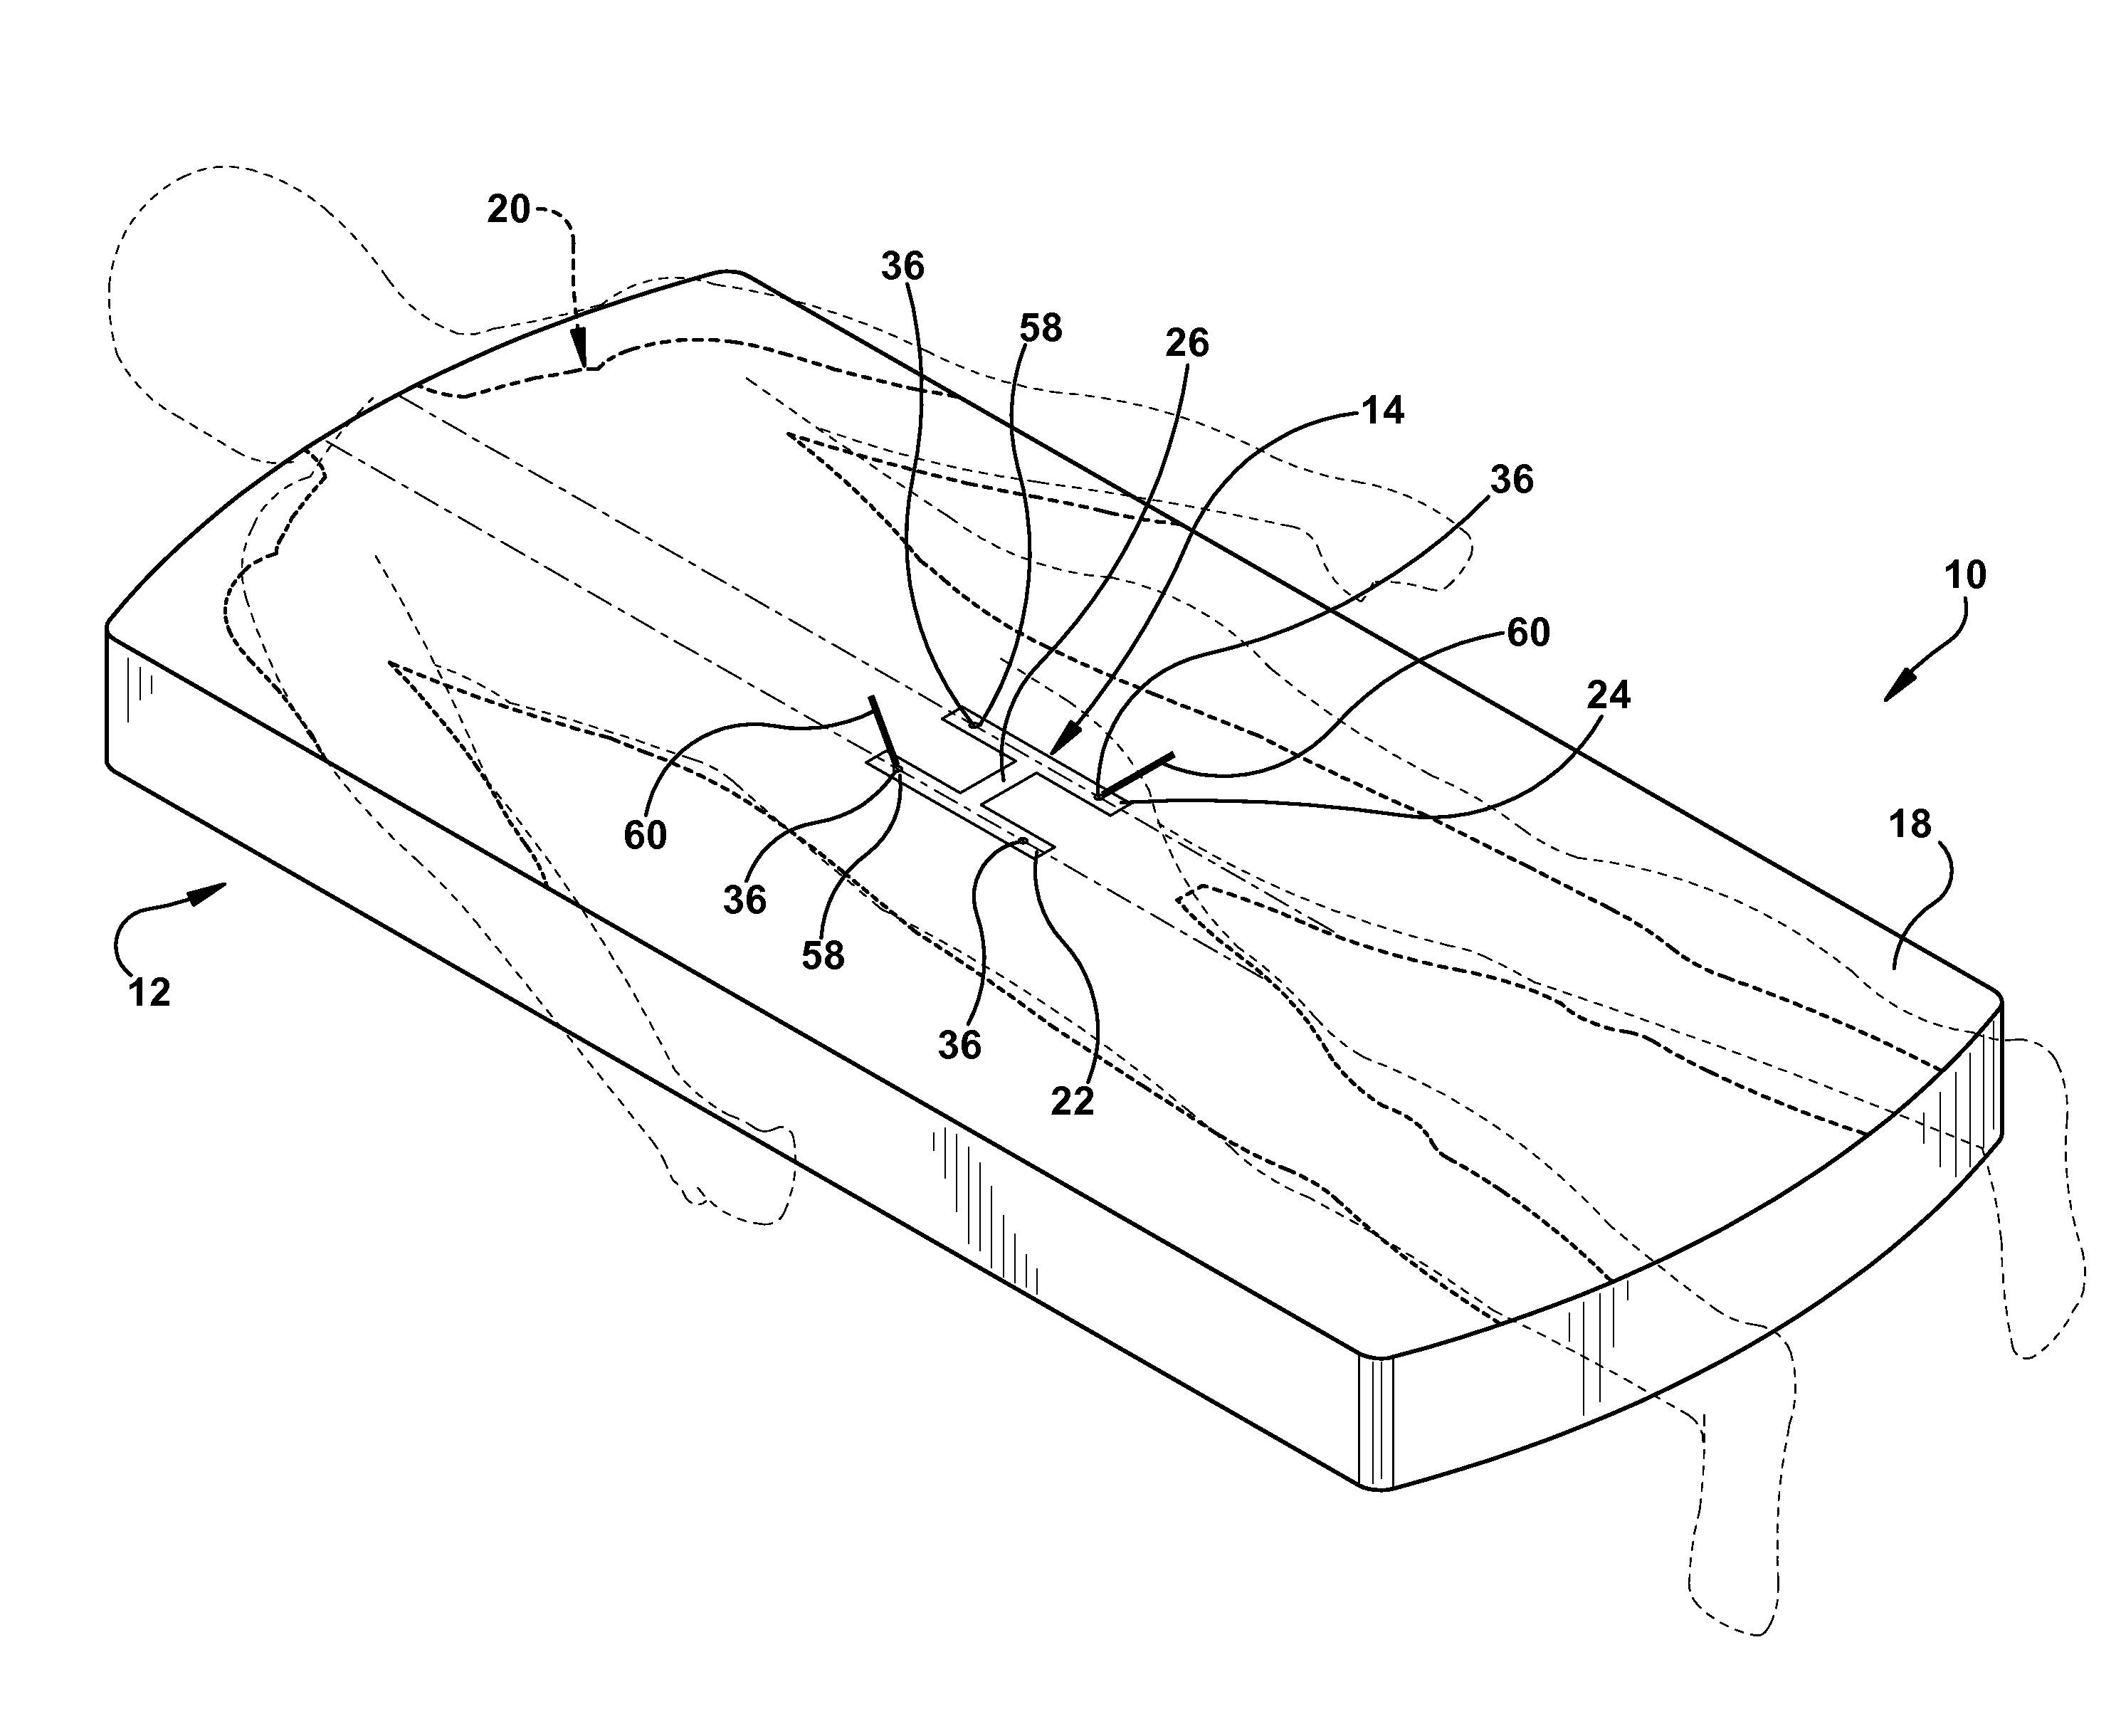 Surgical system for positioning a patient and marking locations for a surgical procedure